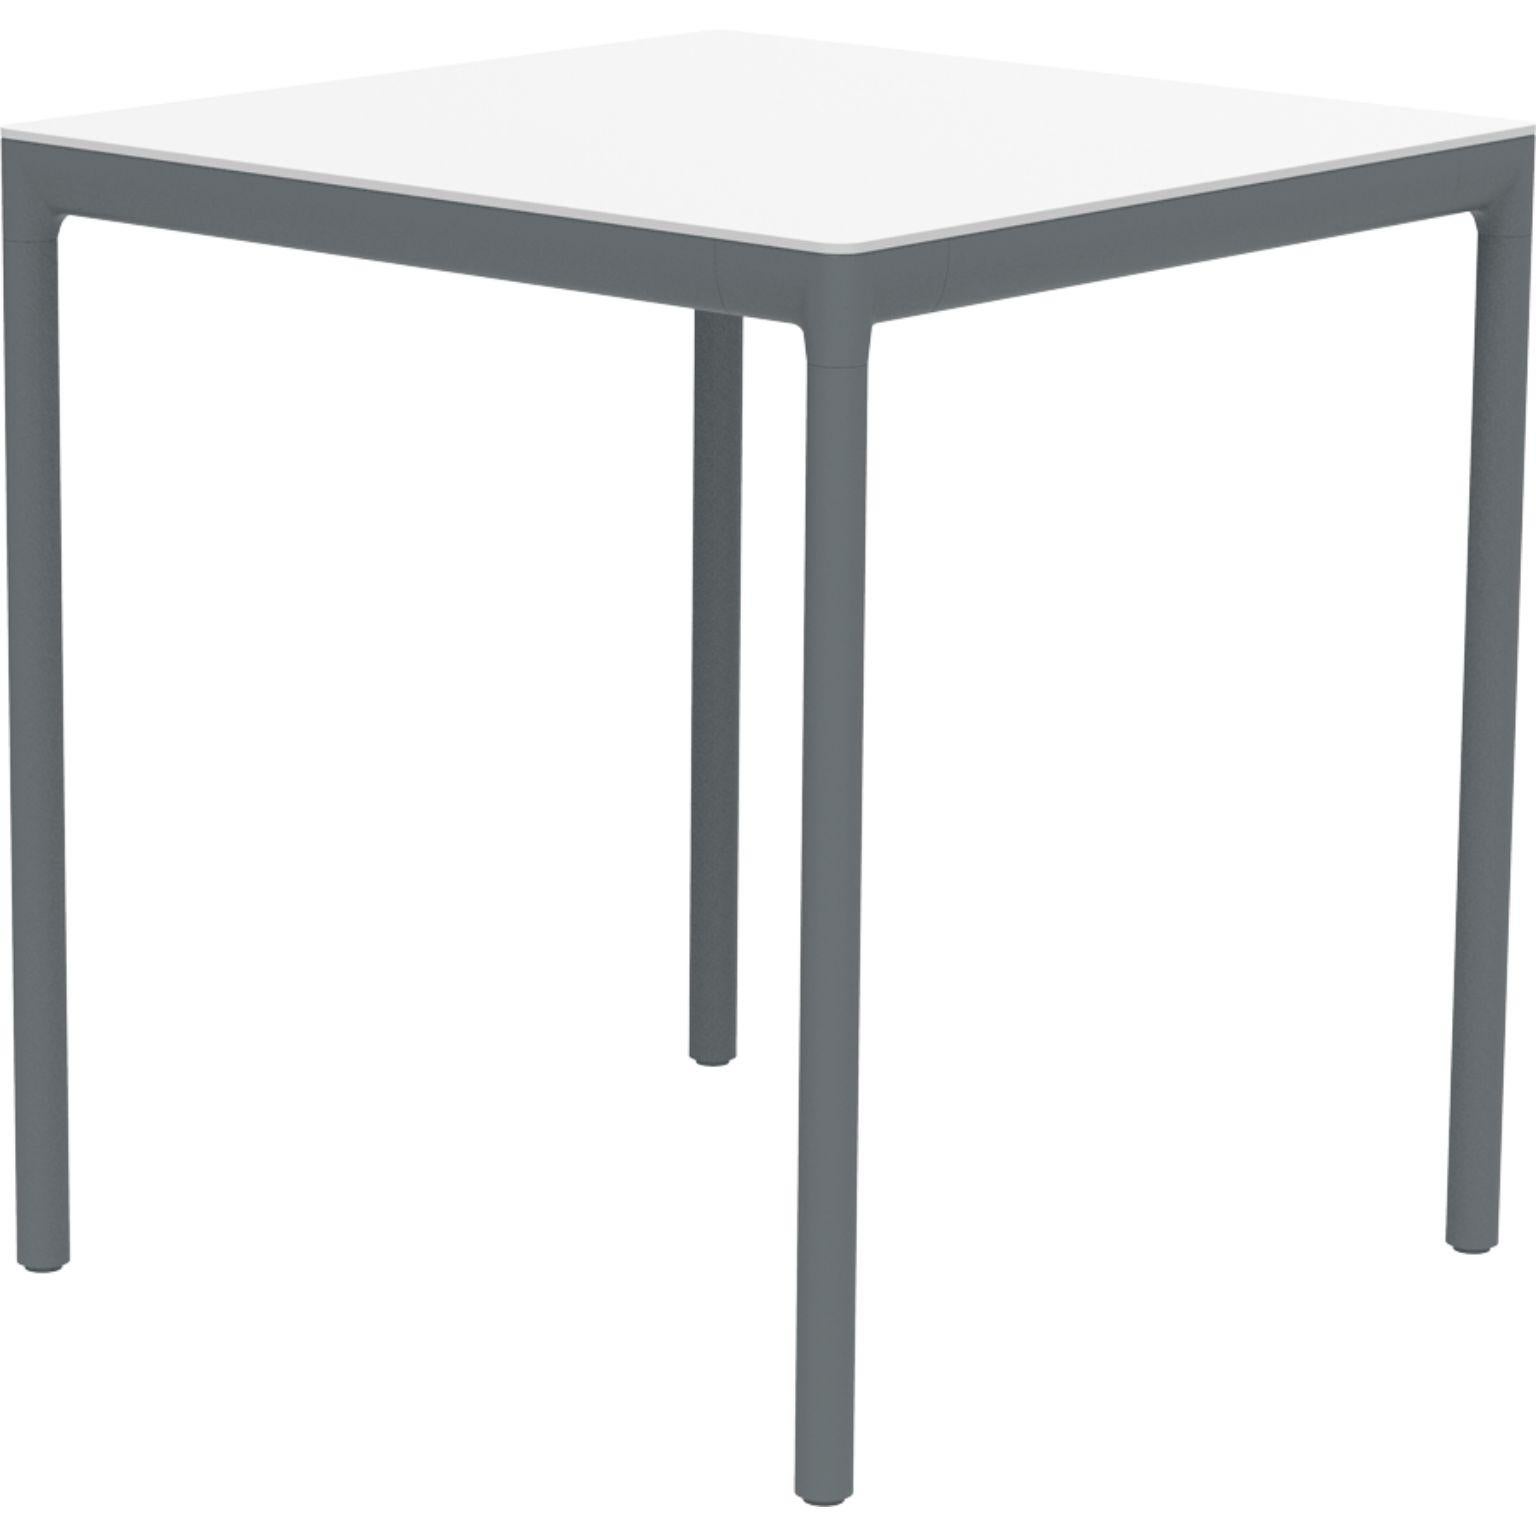 Ribbons grey 70 side table by MOWEE
Dimensions: D70 x W70 x H75 cm.
Material: Aluminum, HPL top.
Weight: 12 kg.
Also available in different colors and finishes. (HPL Black Edge or Neolith top).

An unmistakable collection for its beauty and